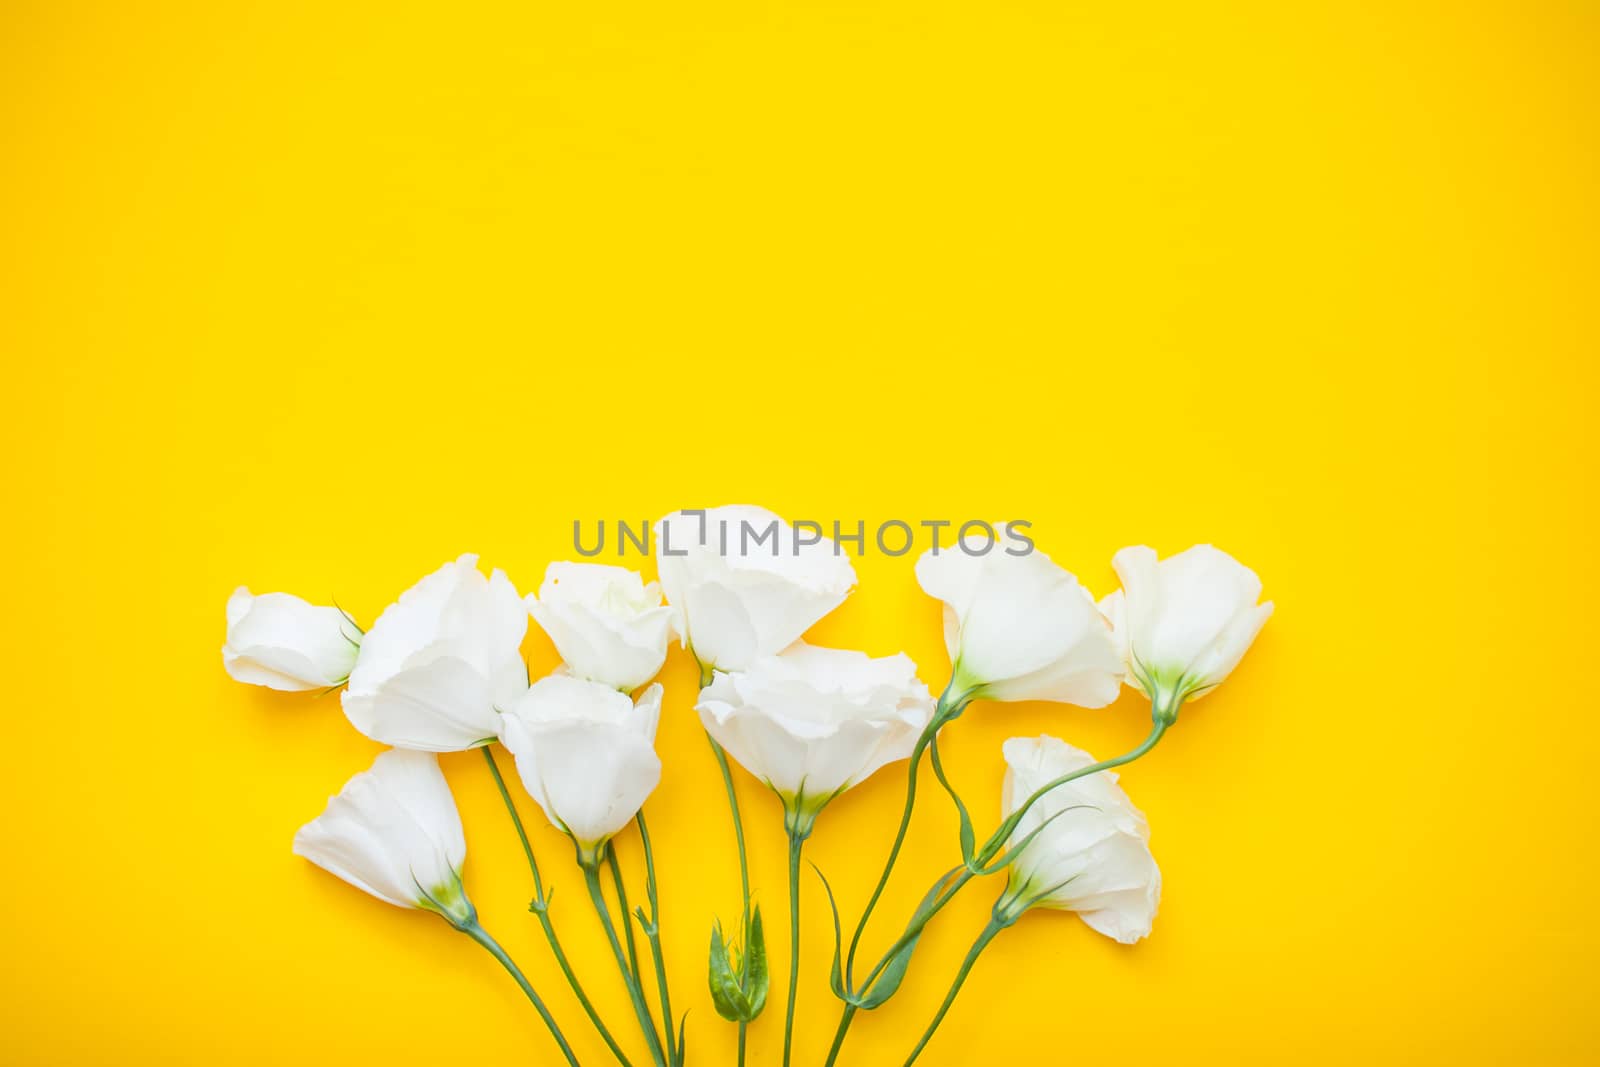 Delicate white eustoma flowers on a bright yellow background. Layout by malyshkamju